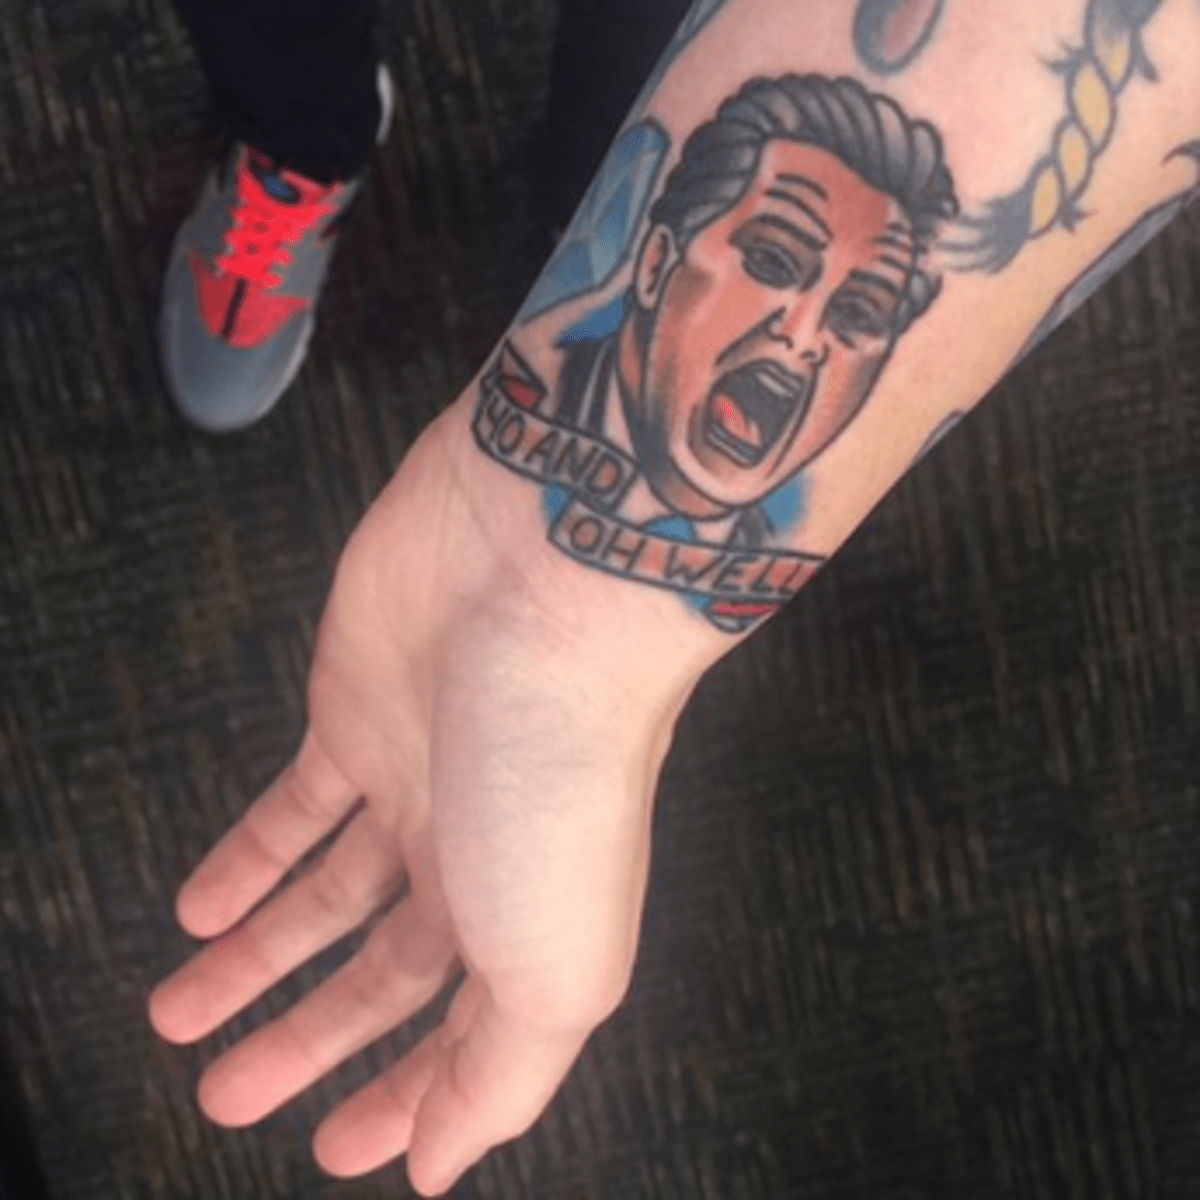 Kentucky tattoo fan hopes to have the last laugh